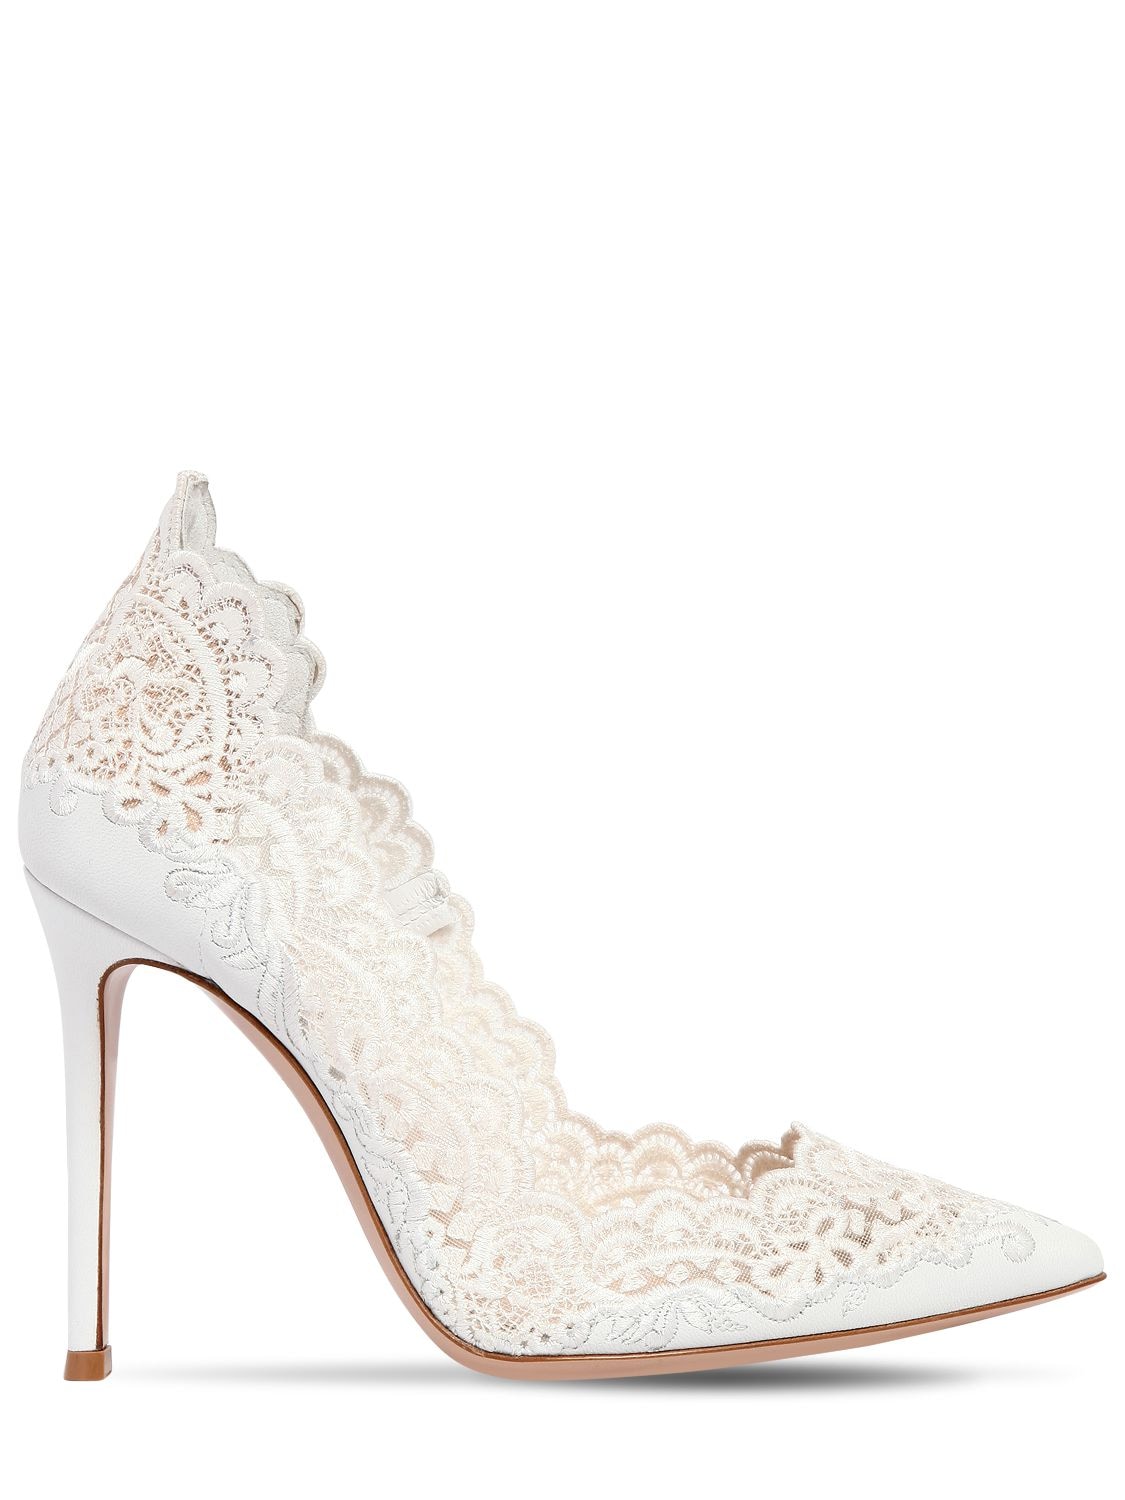 GIANVITO ROSSI 105MM LACE & LEATHER PUMPS,68I83R004-QKLBTG2